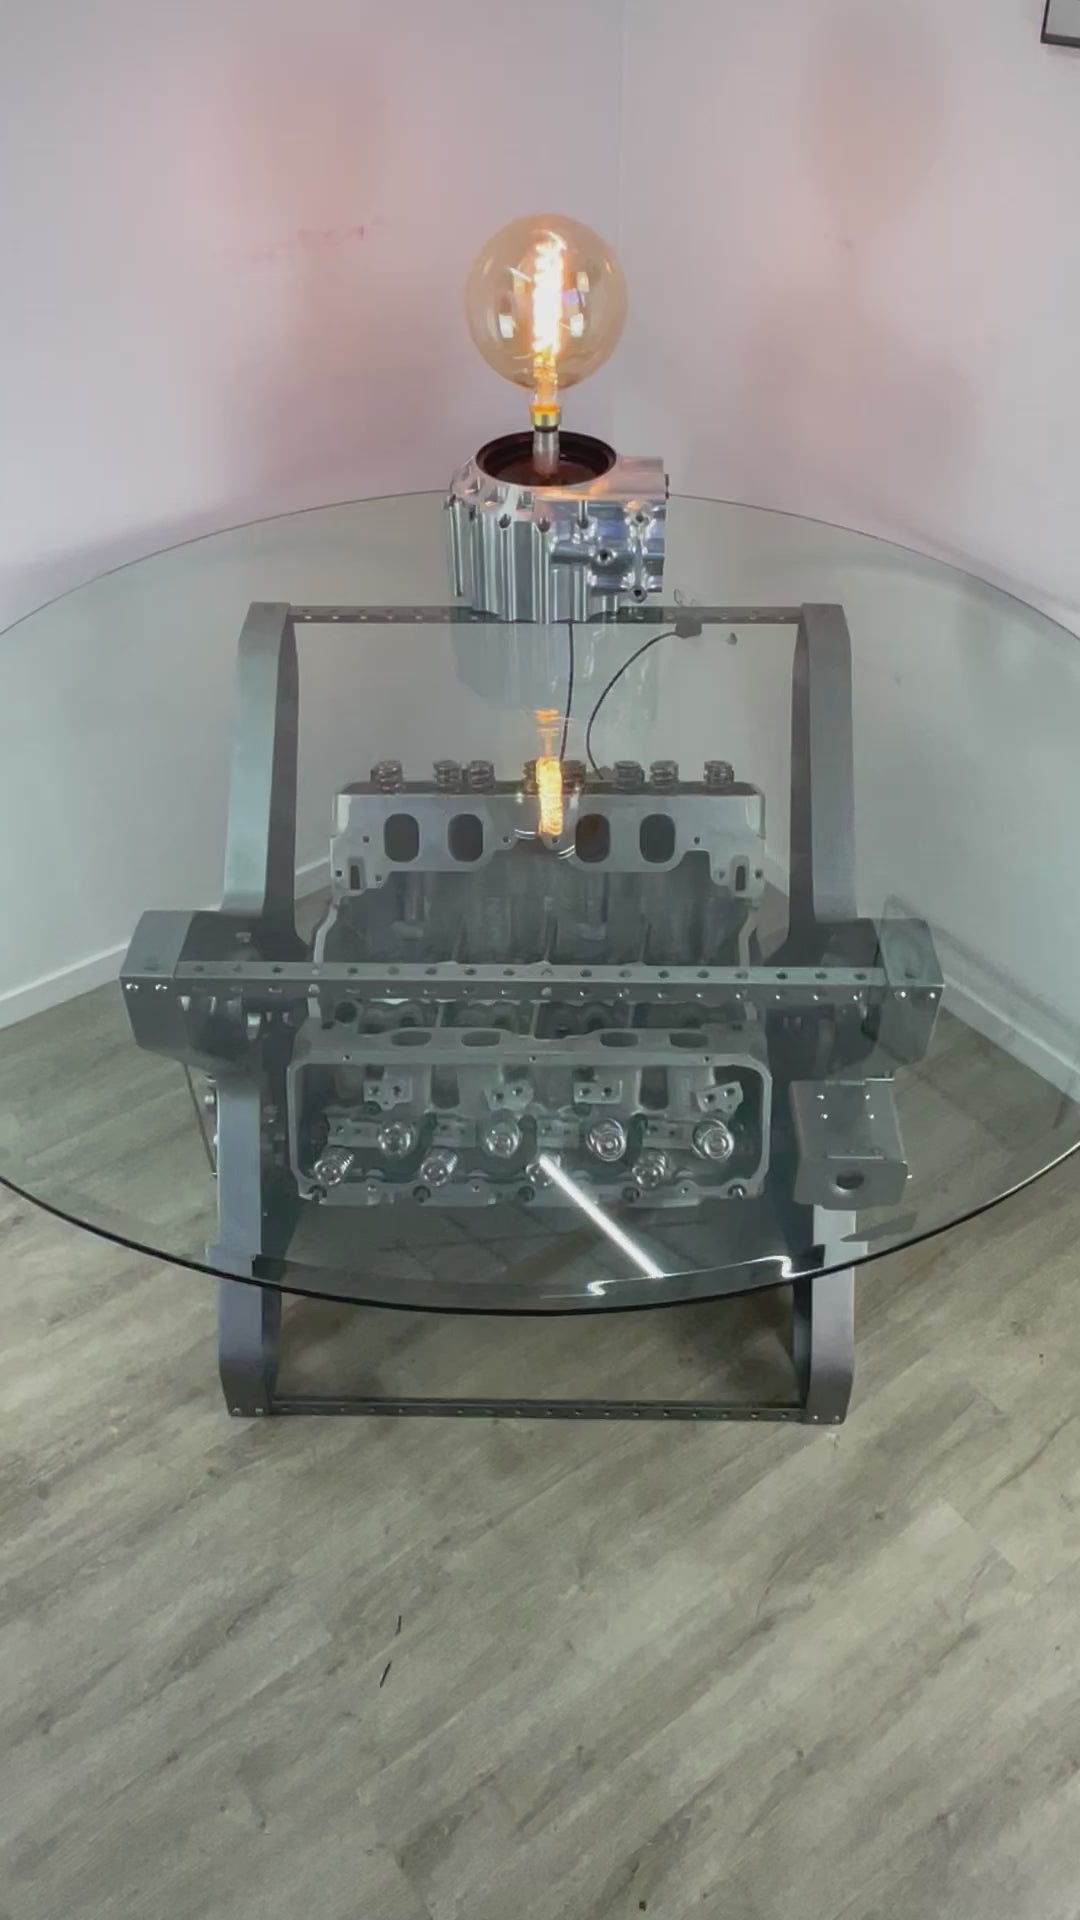 Video of an X-frame rotating engine dining table with a round glass top and car part lamp on top.